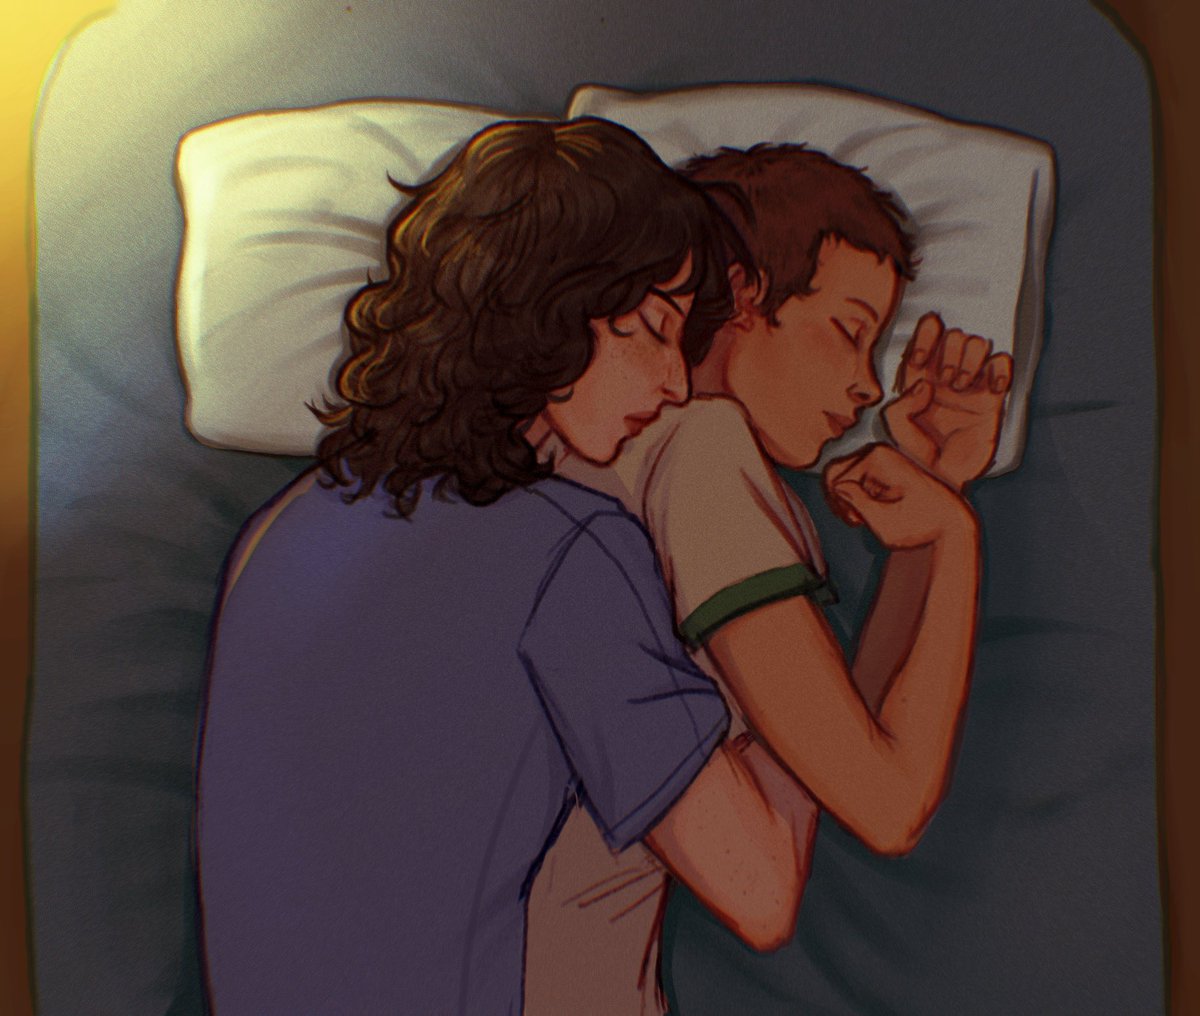 El is absolutely the little spoon